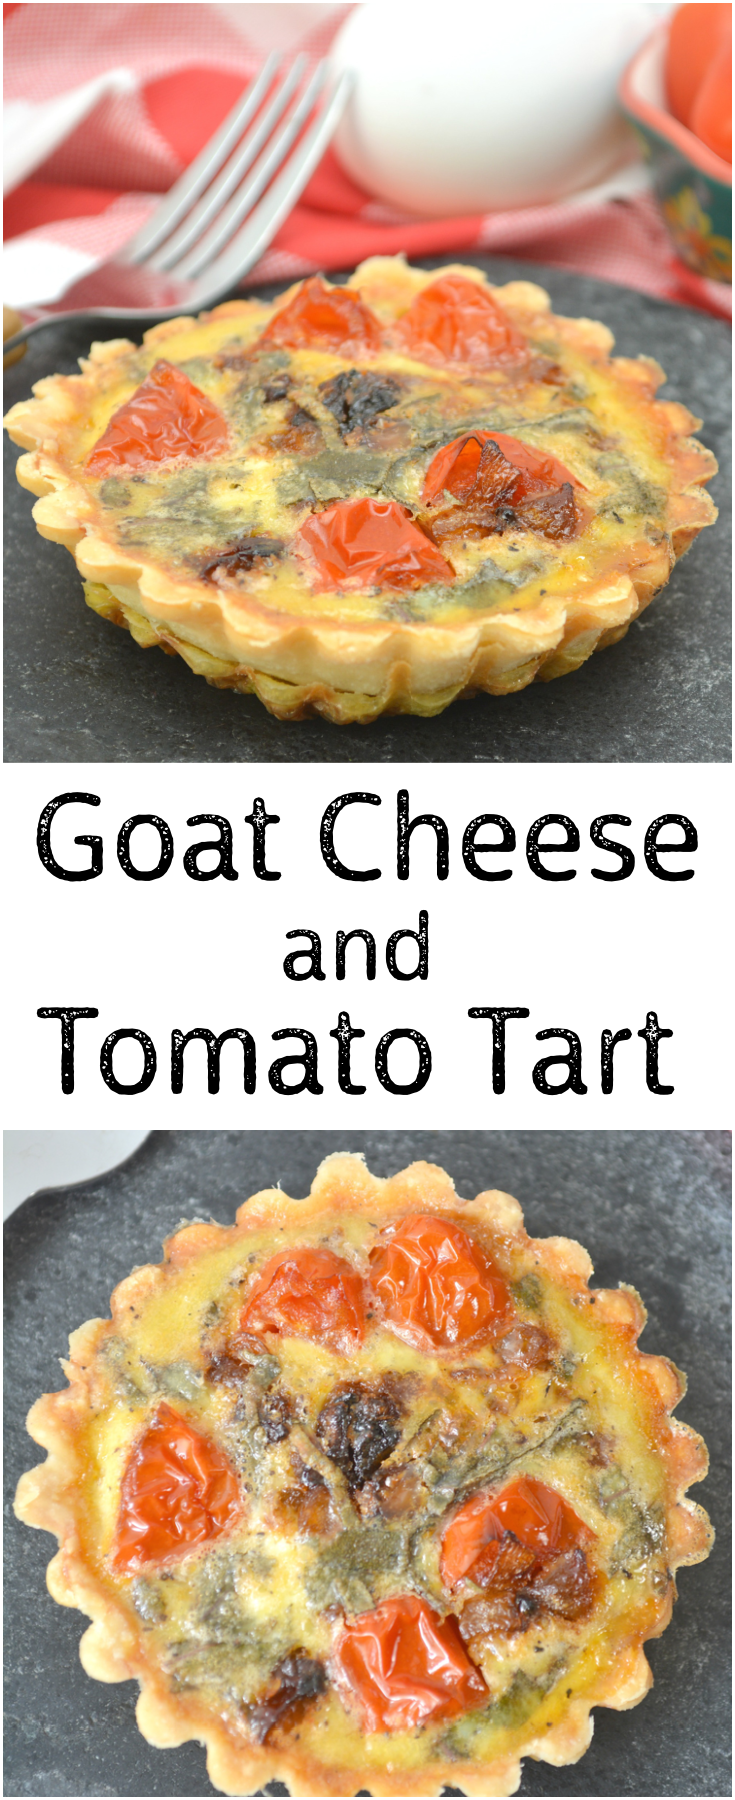 Easy and healthy Goat Cheese & Tomato Tart - whipped together easily with simple ingredients in a ready made pie crust. Perfect for a light summer dinner!